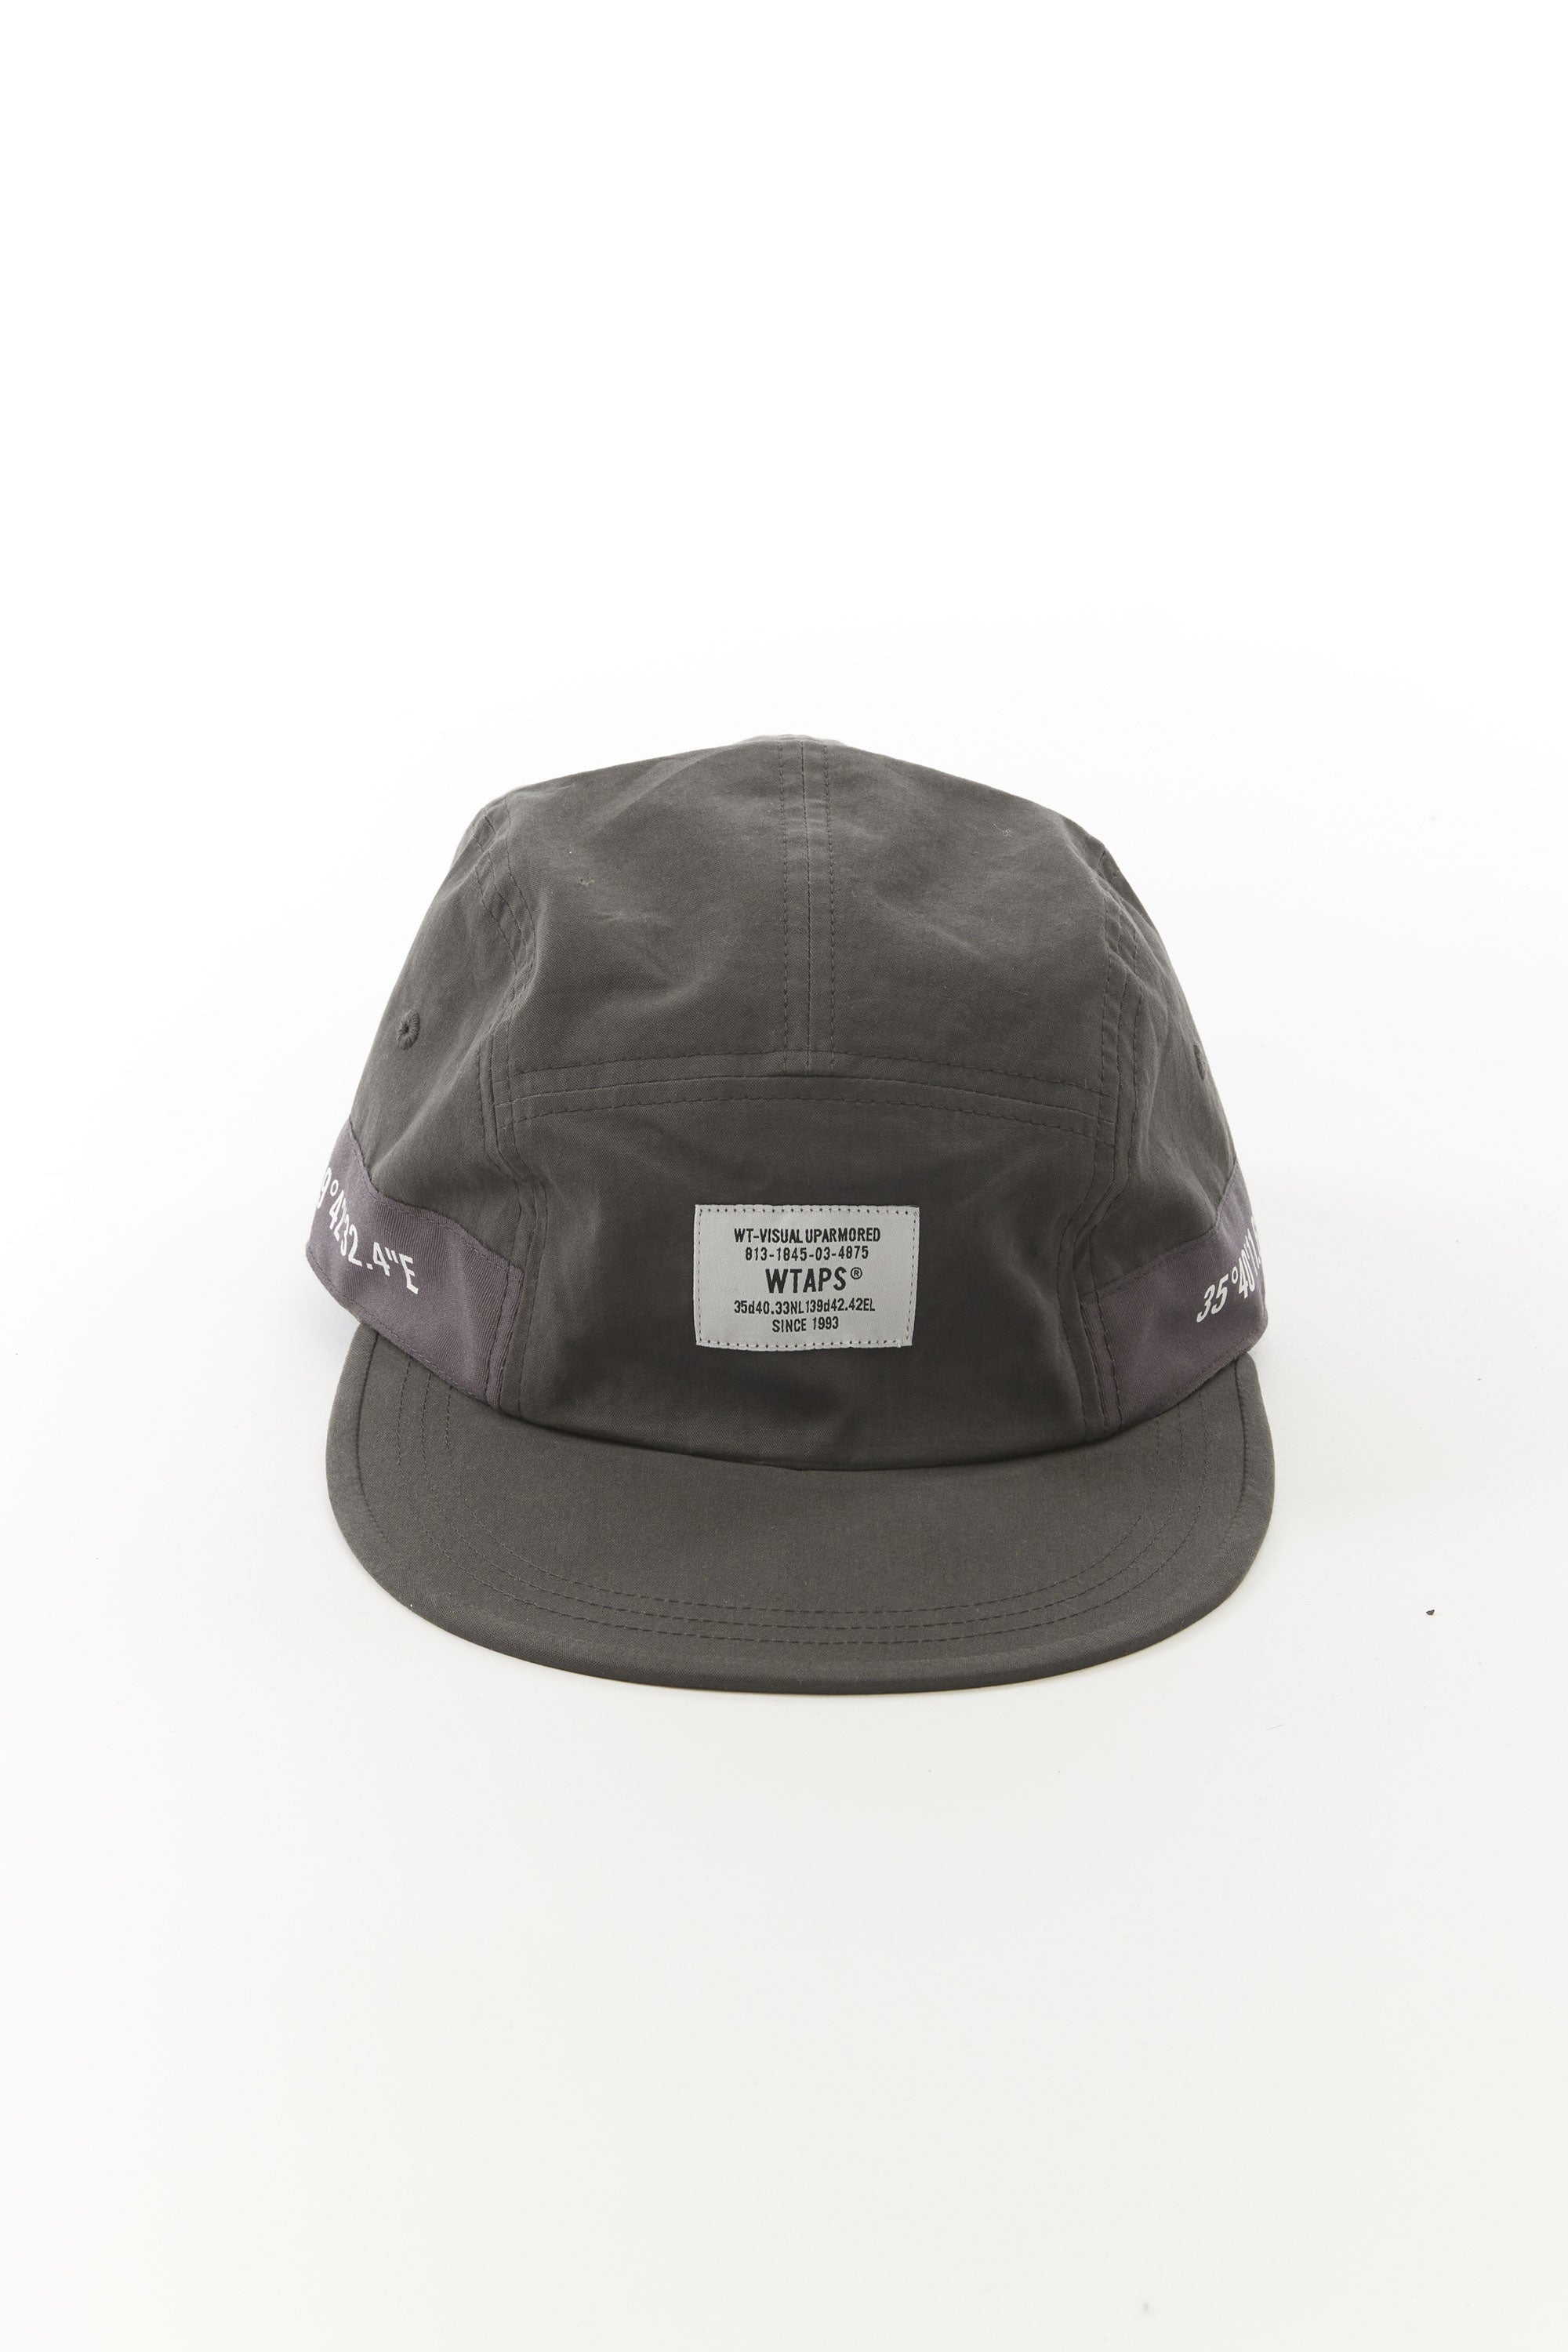 The WTAPS - T-7 GPS WEATHER CAP CHARCOAL available online with global shipping, and in PAM Stores Melbourne and Sydney.